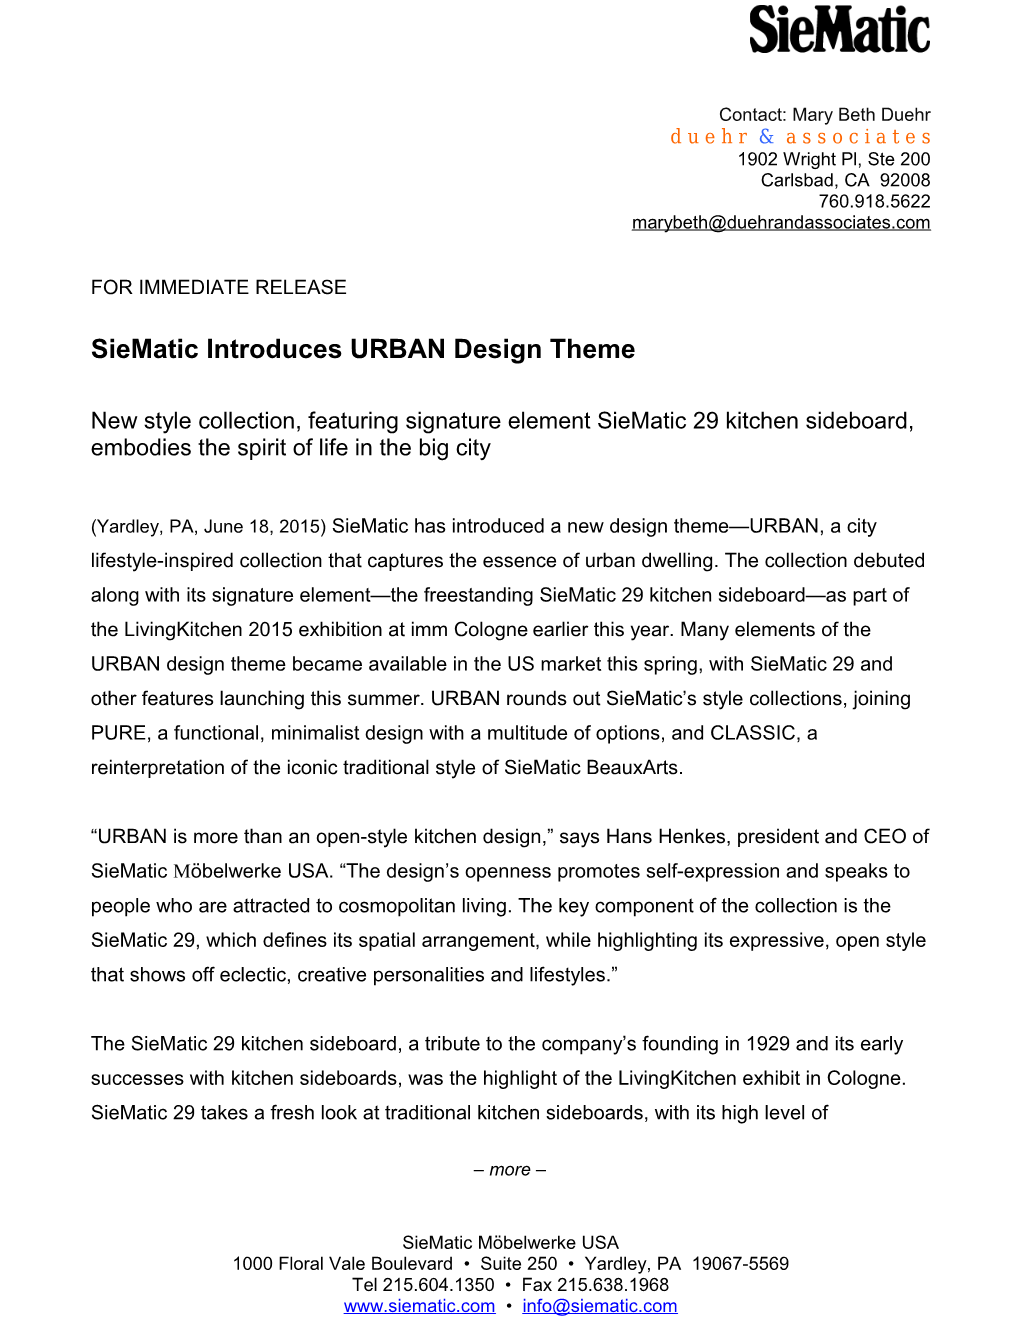 Siematic Press Release